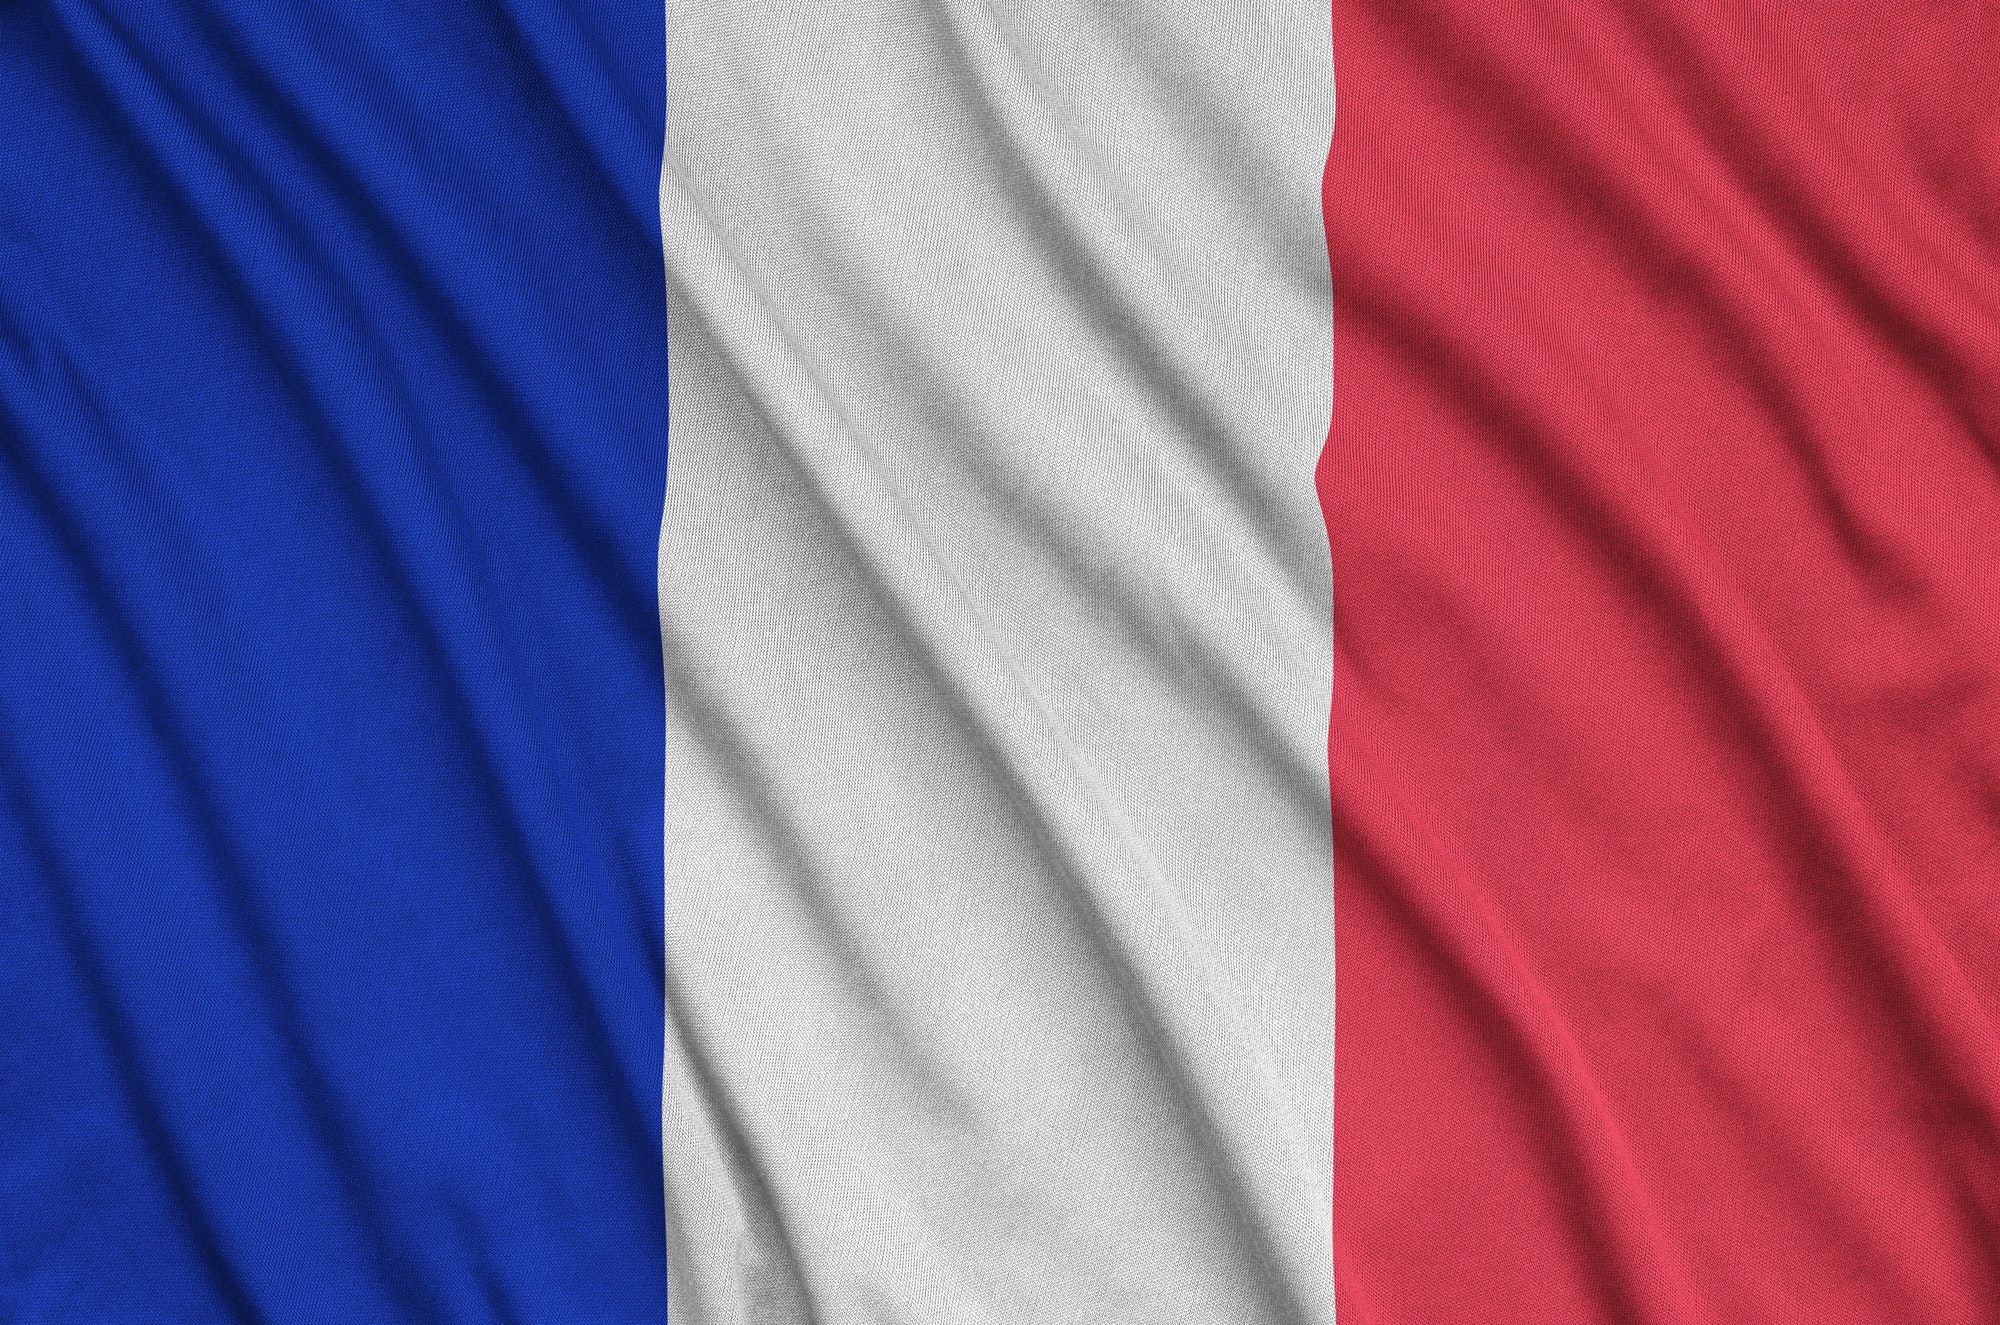 france-flag-is-depicted-on-a-sports-cloth-fabric-with-many-folds-sport-team-waving-banner.jpg